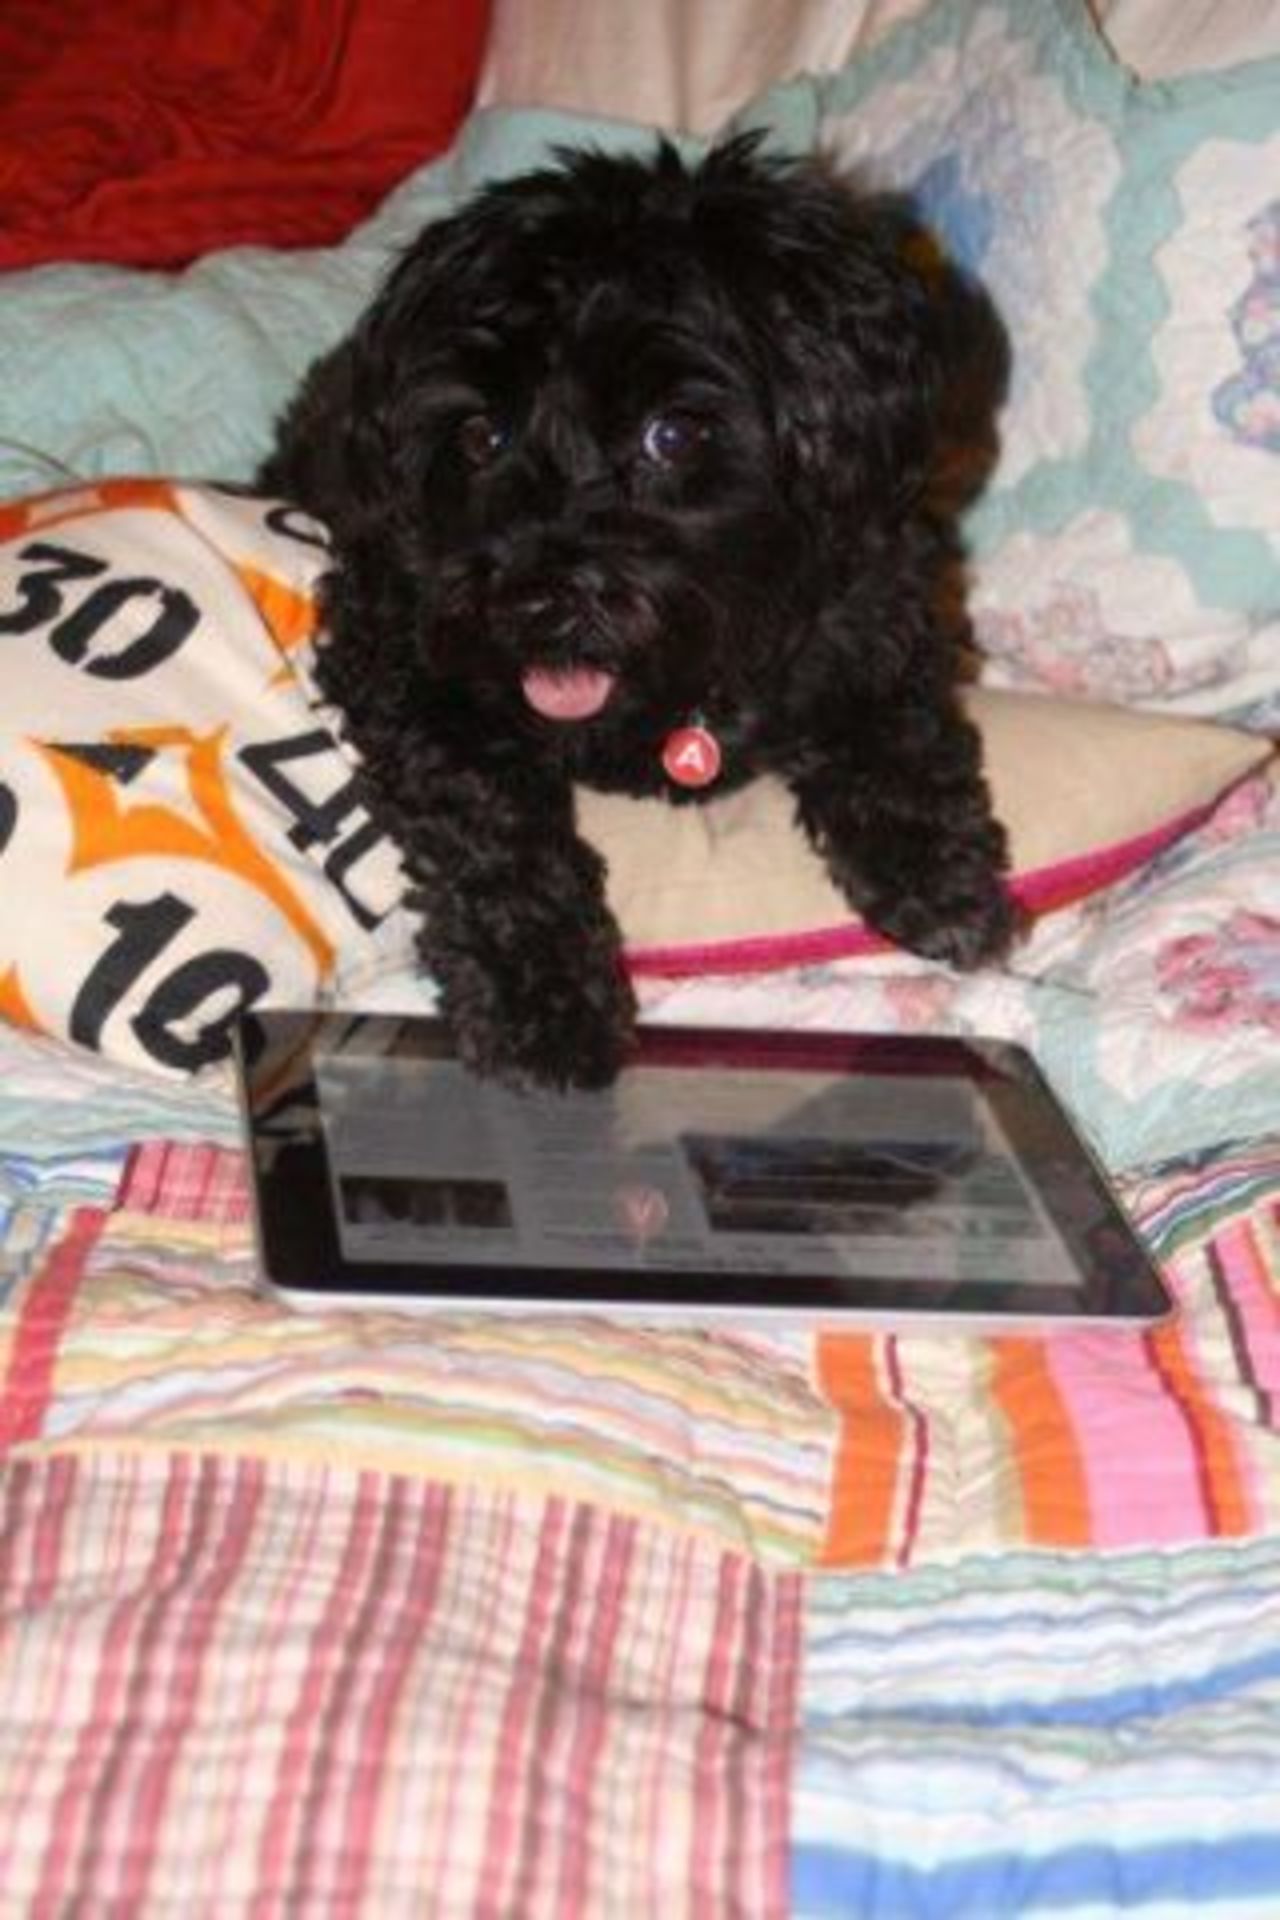 The New York native says she was always happiest when around dogs, or talking about them, so decided that time was right to take the plunge and follow her passion. Seen here is Amos, the face of School for the Dogs, navigating his iPad.